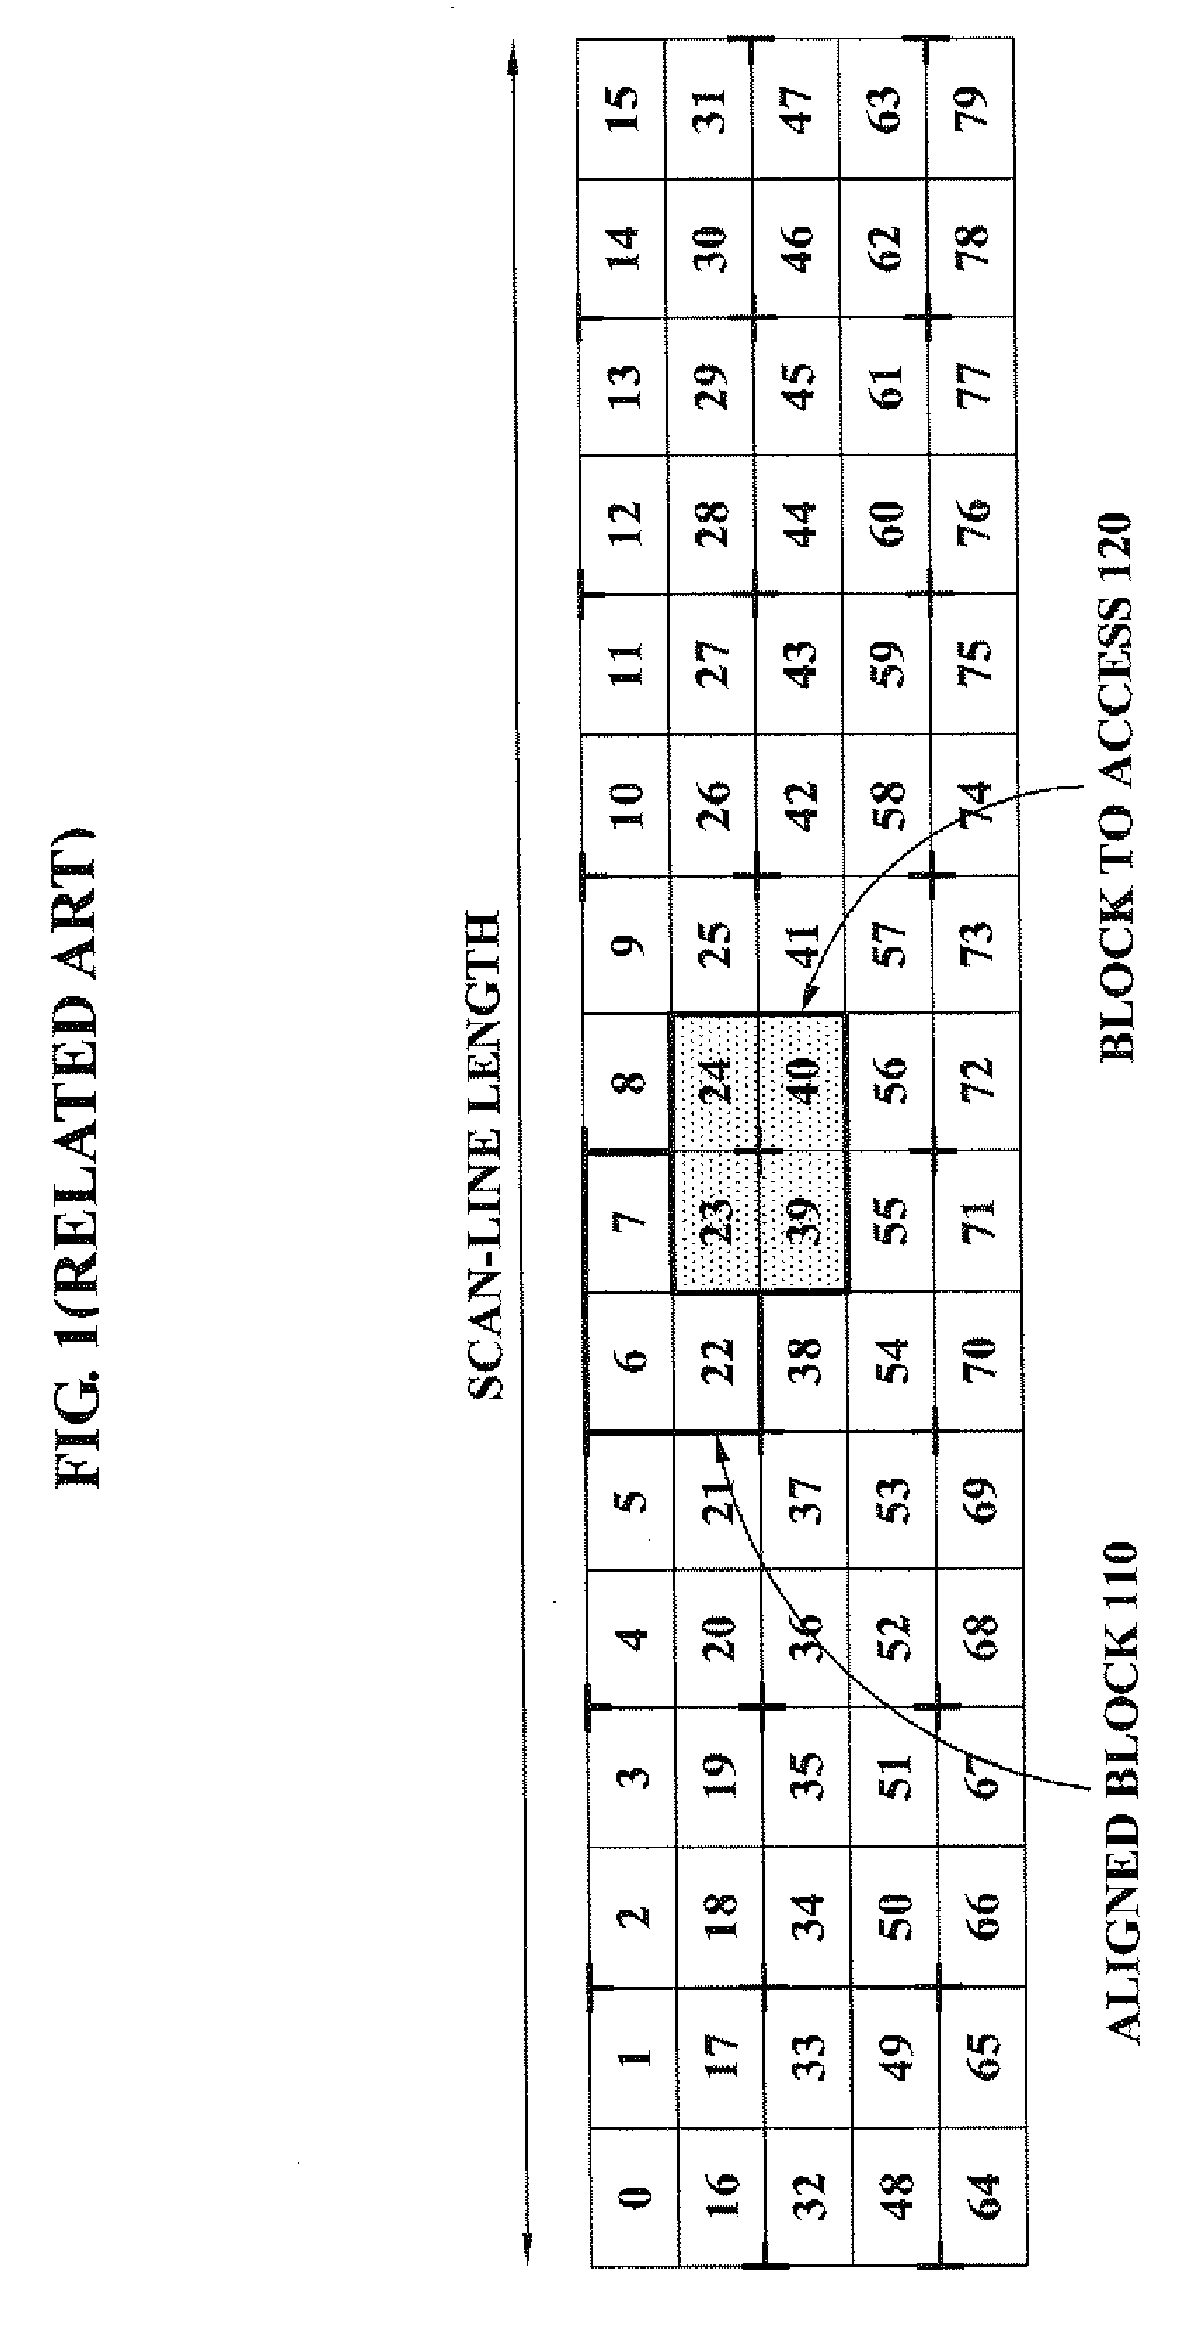 Memory access method using three dimensional address mapping